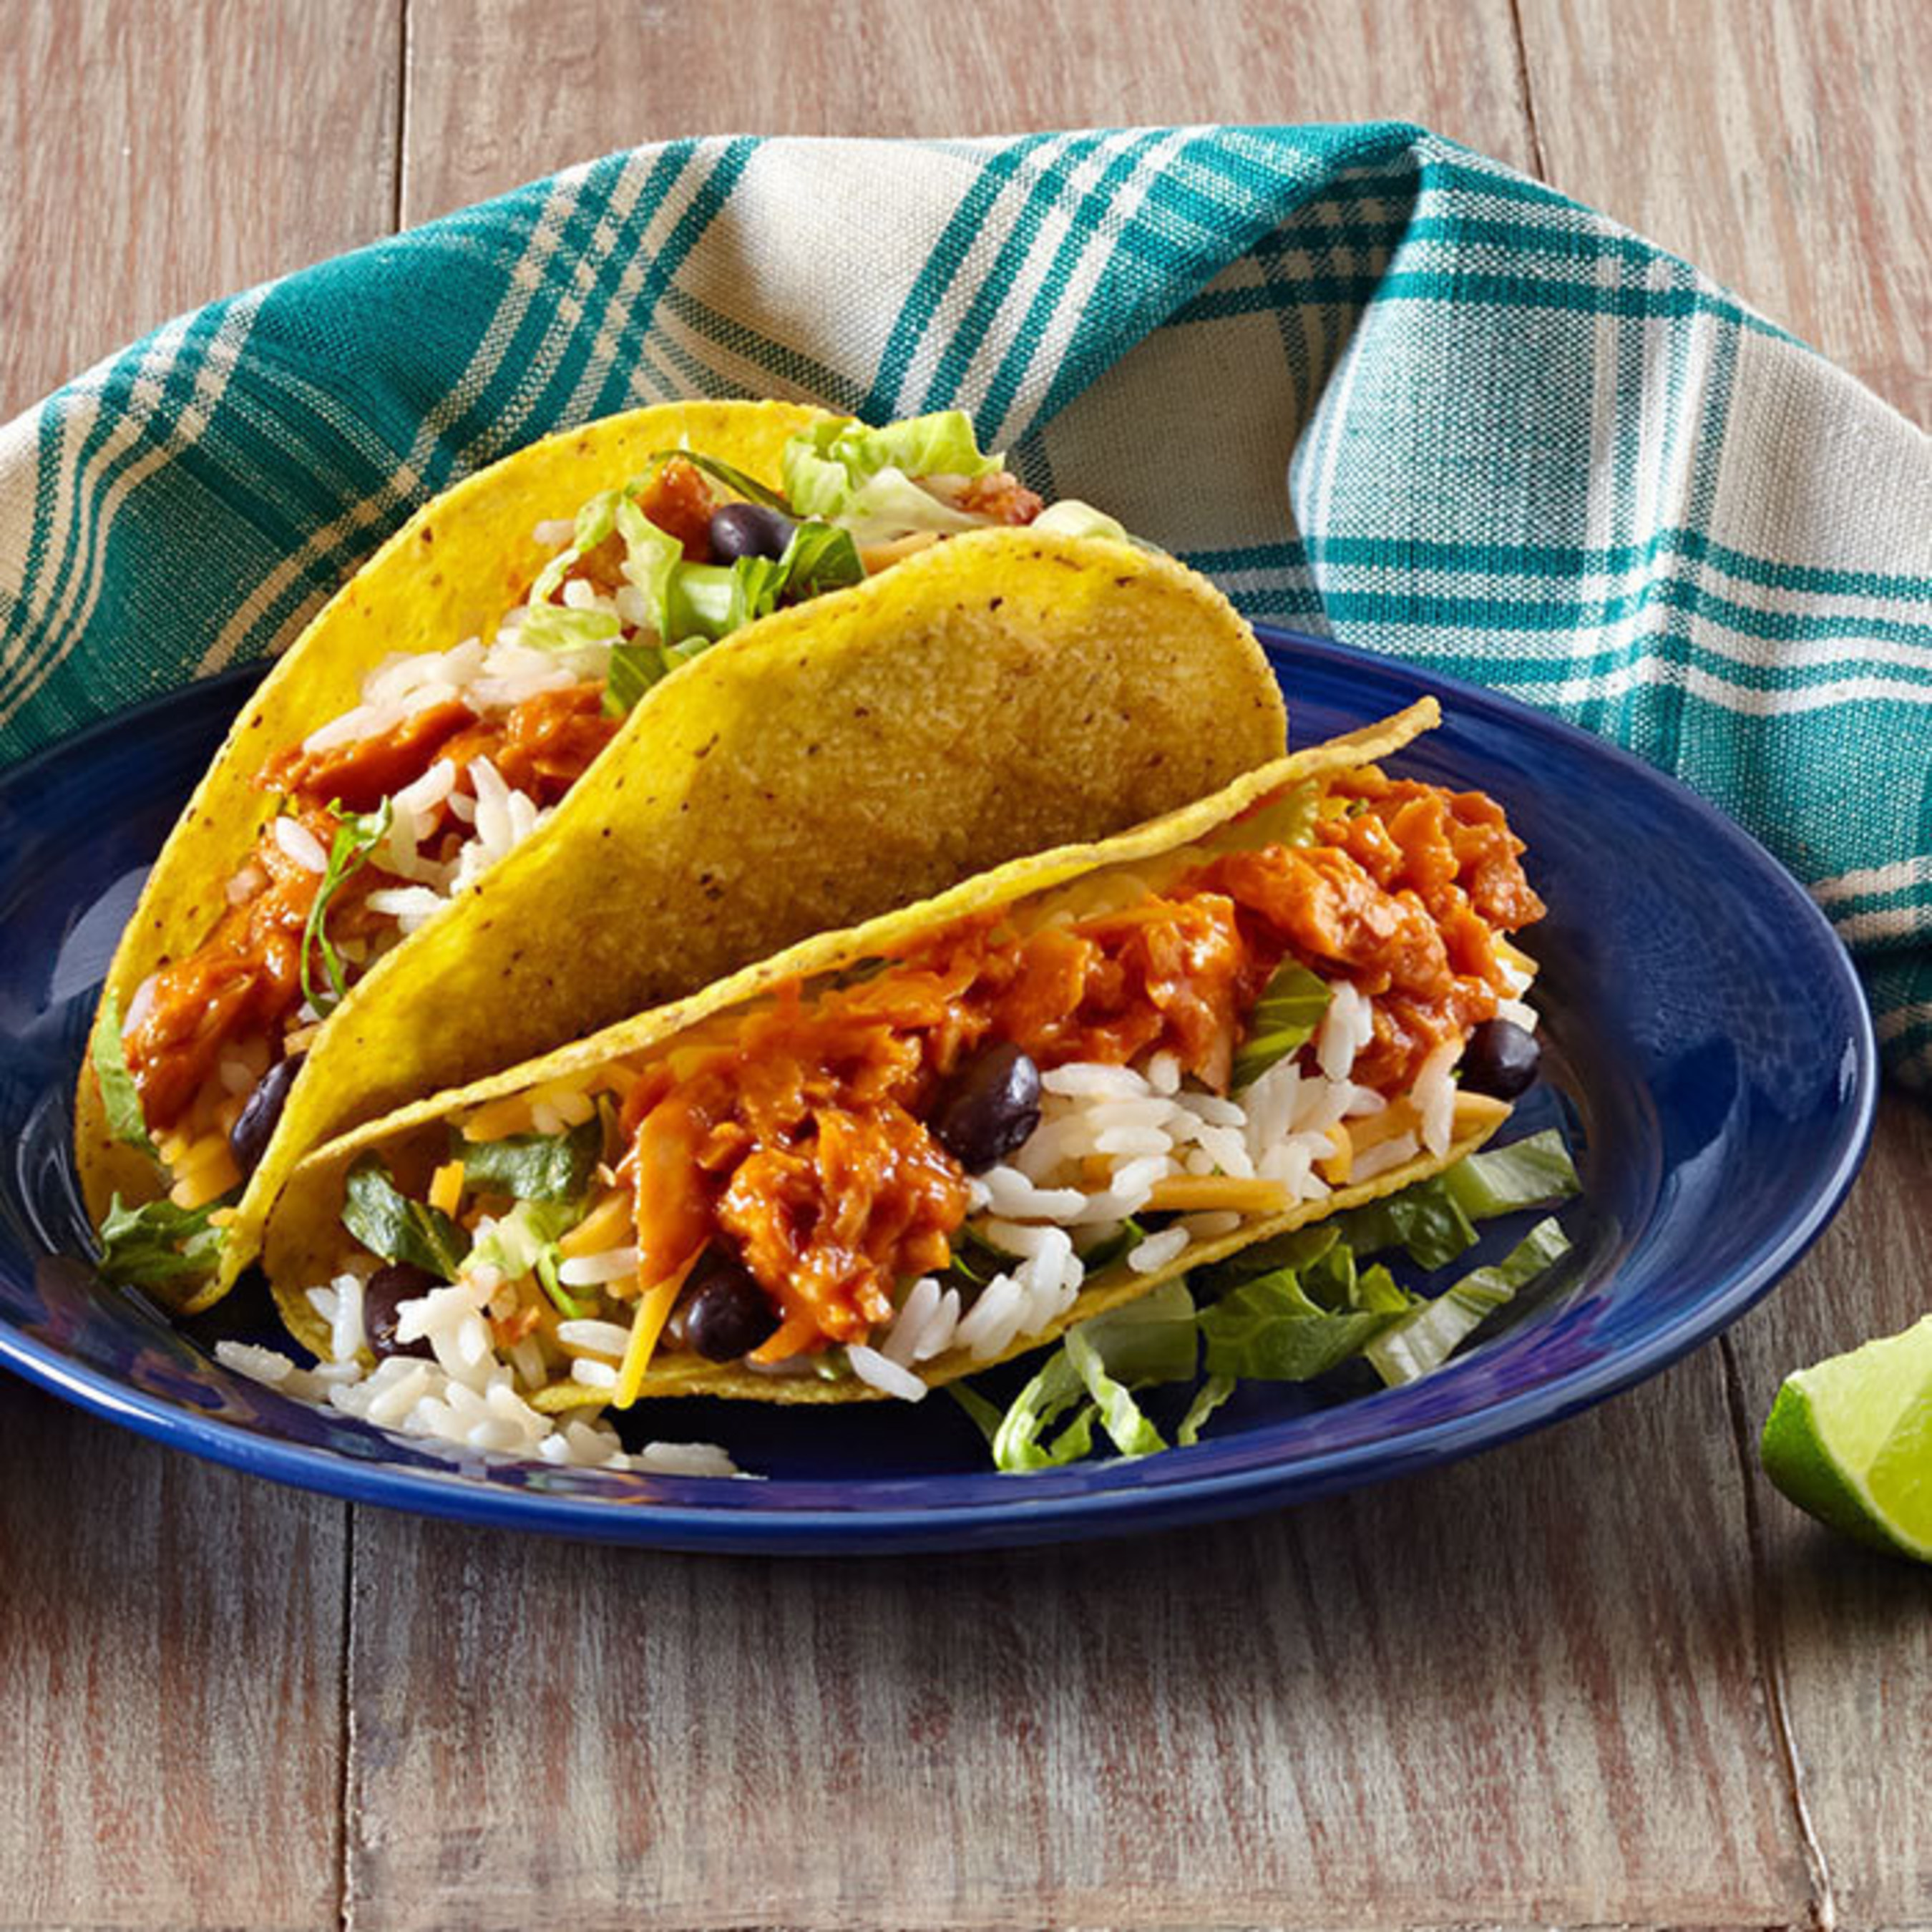 Celebrate #NationalSalmonDay on October 8 with the perfect pairing: salmon and rice. These Black Bean and Barbecue Salmon White Rice Tacos are just one of the simple, delicious recipes you can make.